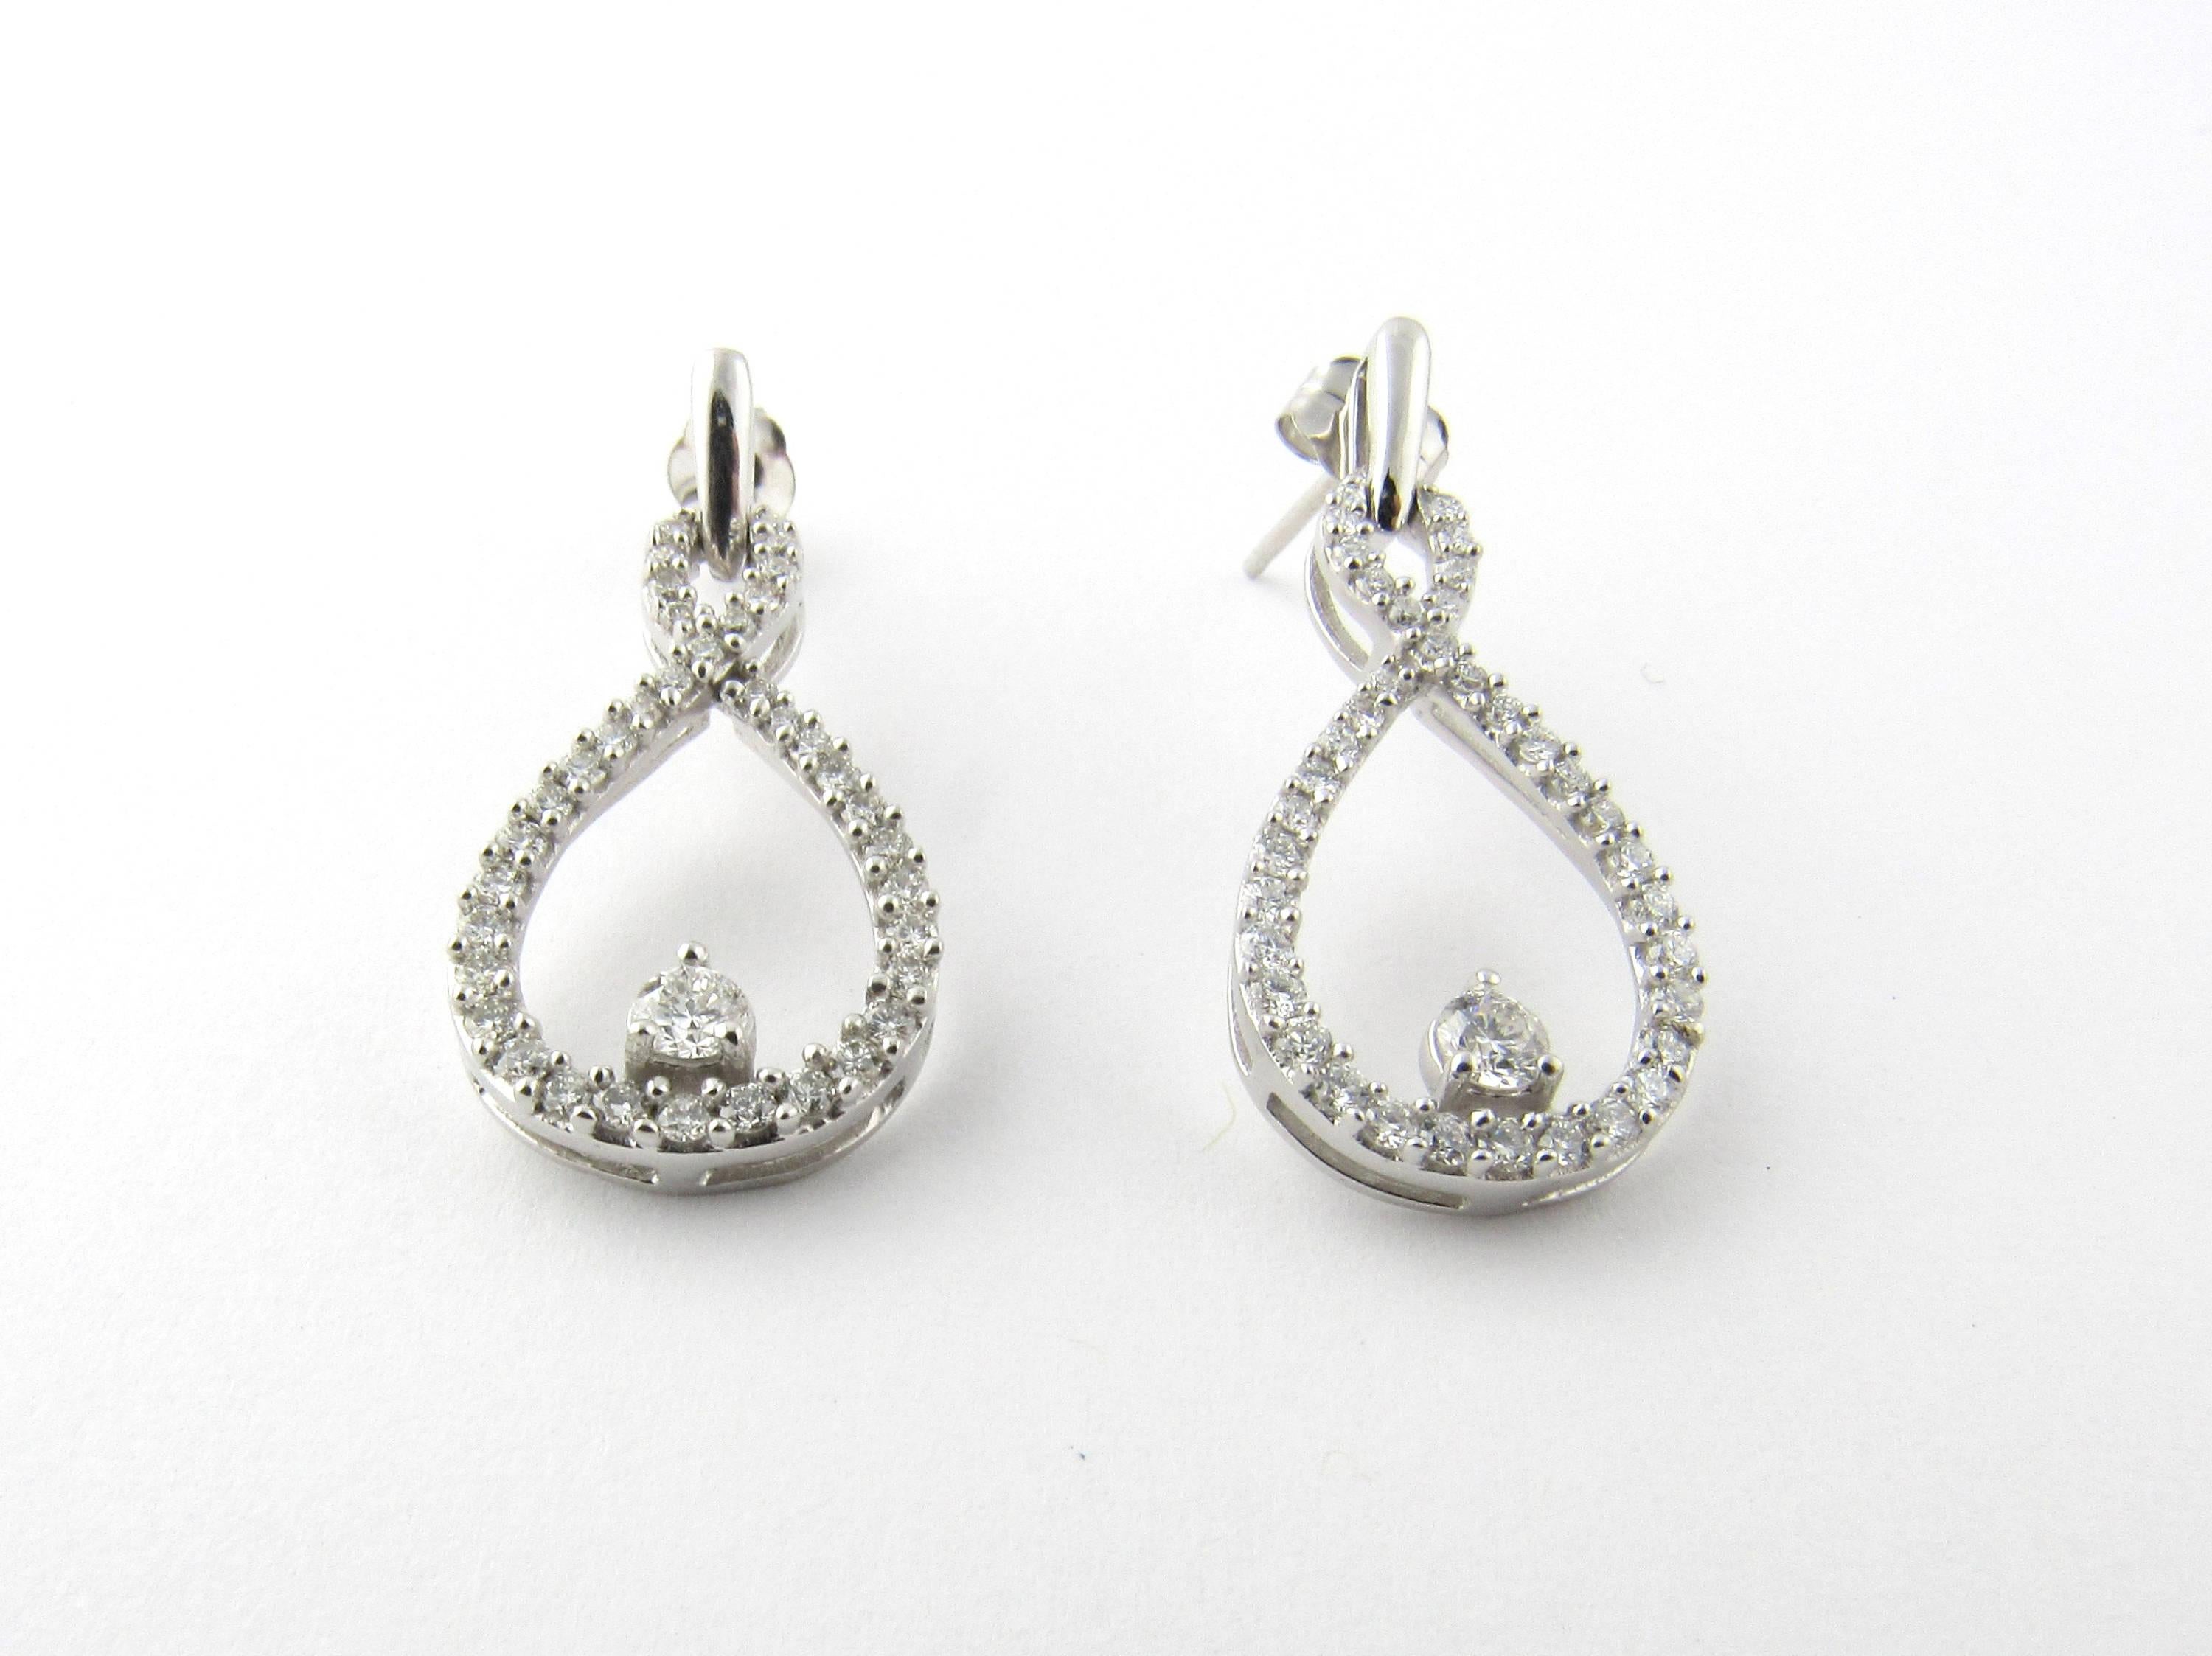 Vintage 14 Karat White Gold Diamond Earrings-

These tear drop earrings feature a center diamond in each which is approx. .05 cts for a total of .10cts.

37 round brilliant diamonds surround the center of each of these earrings for a total of 74